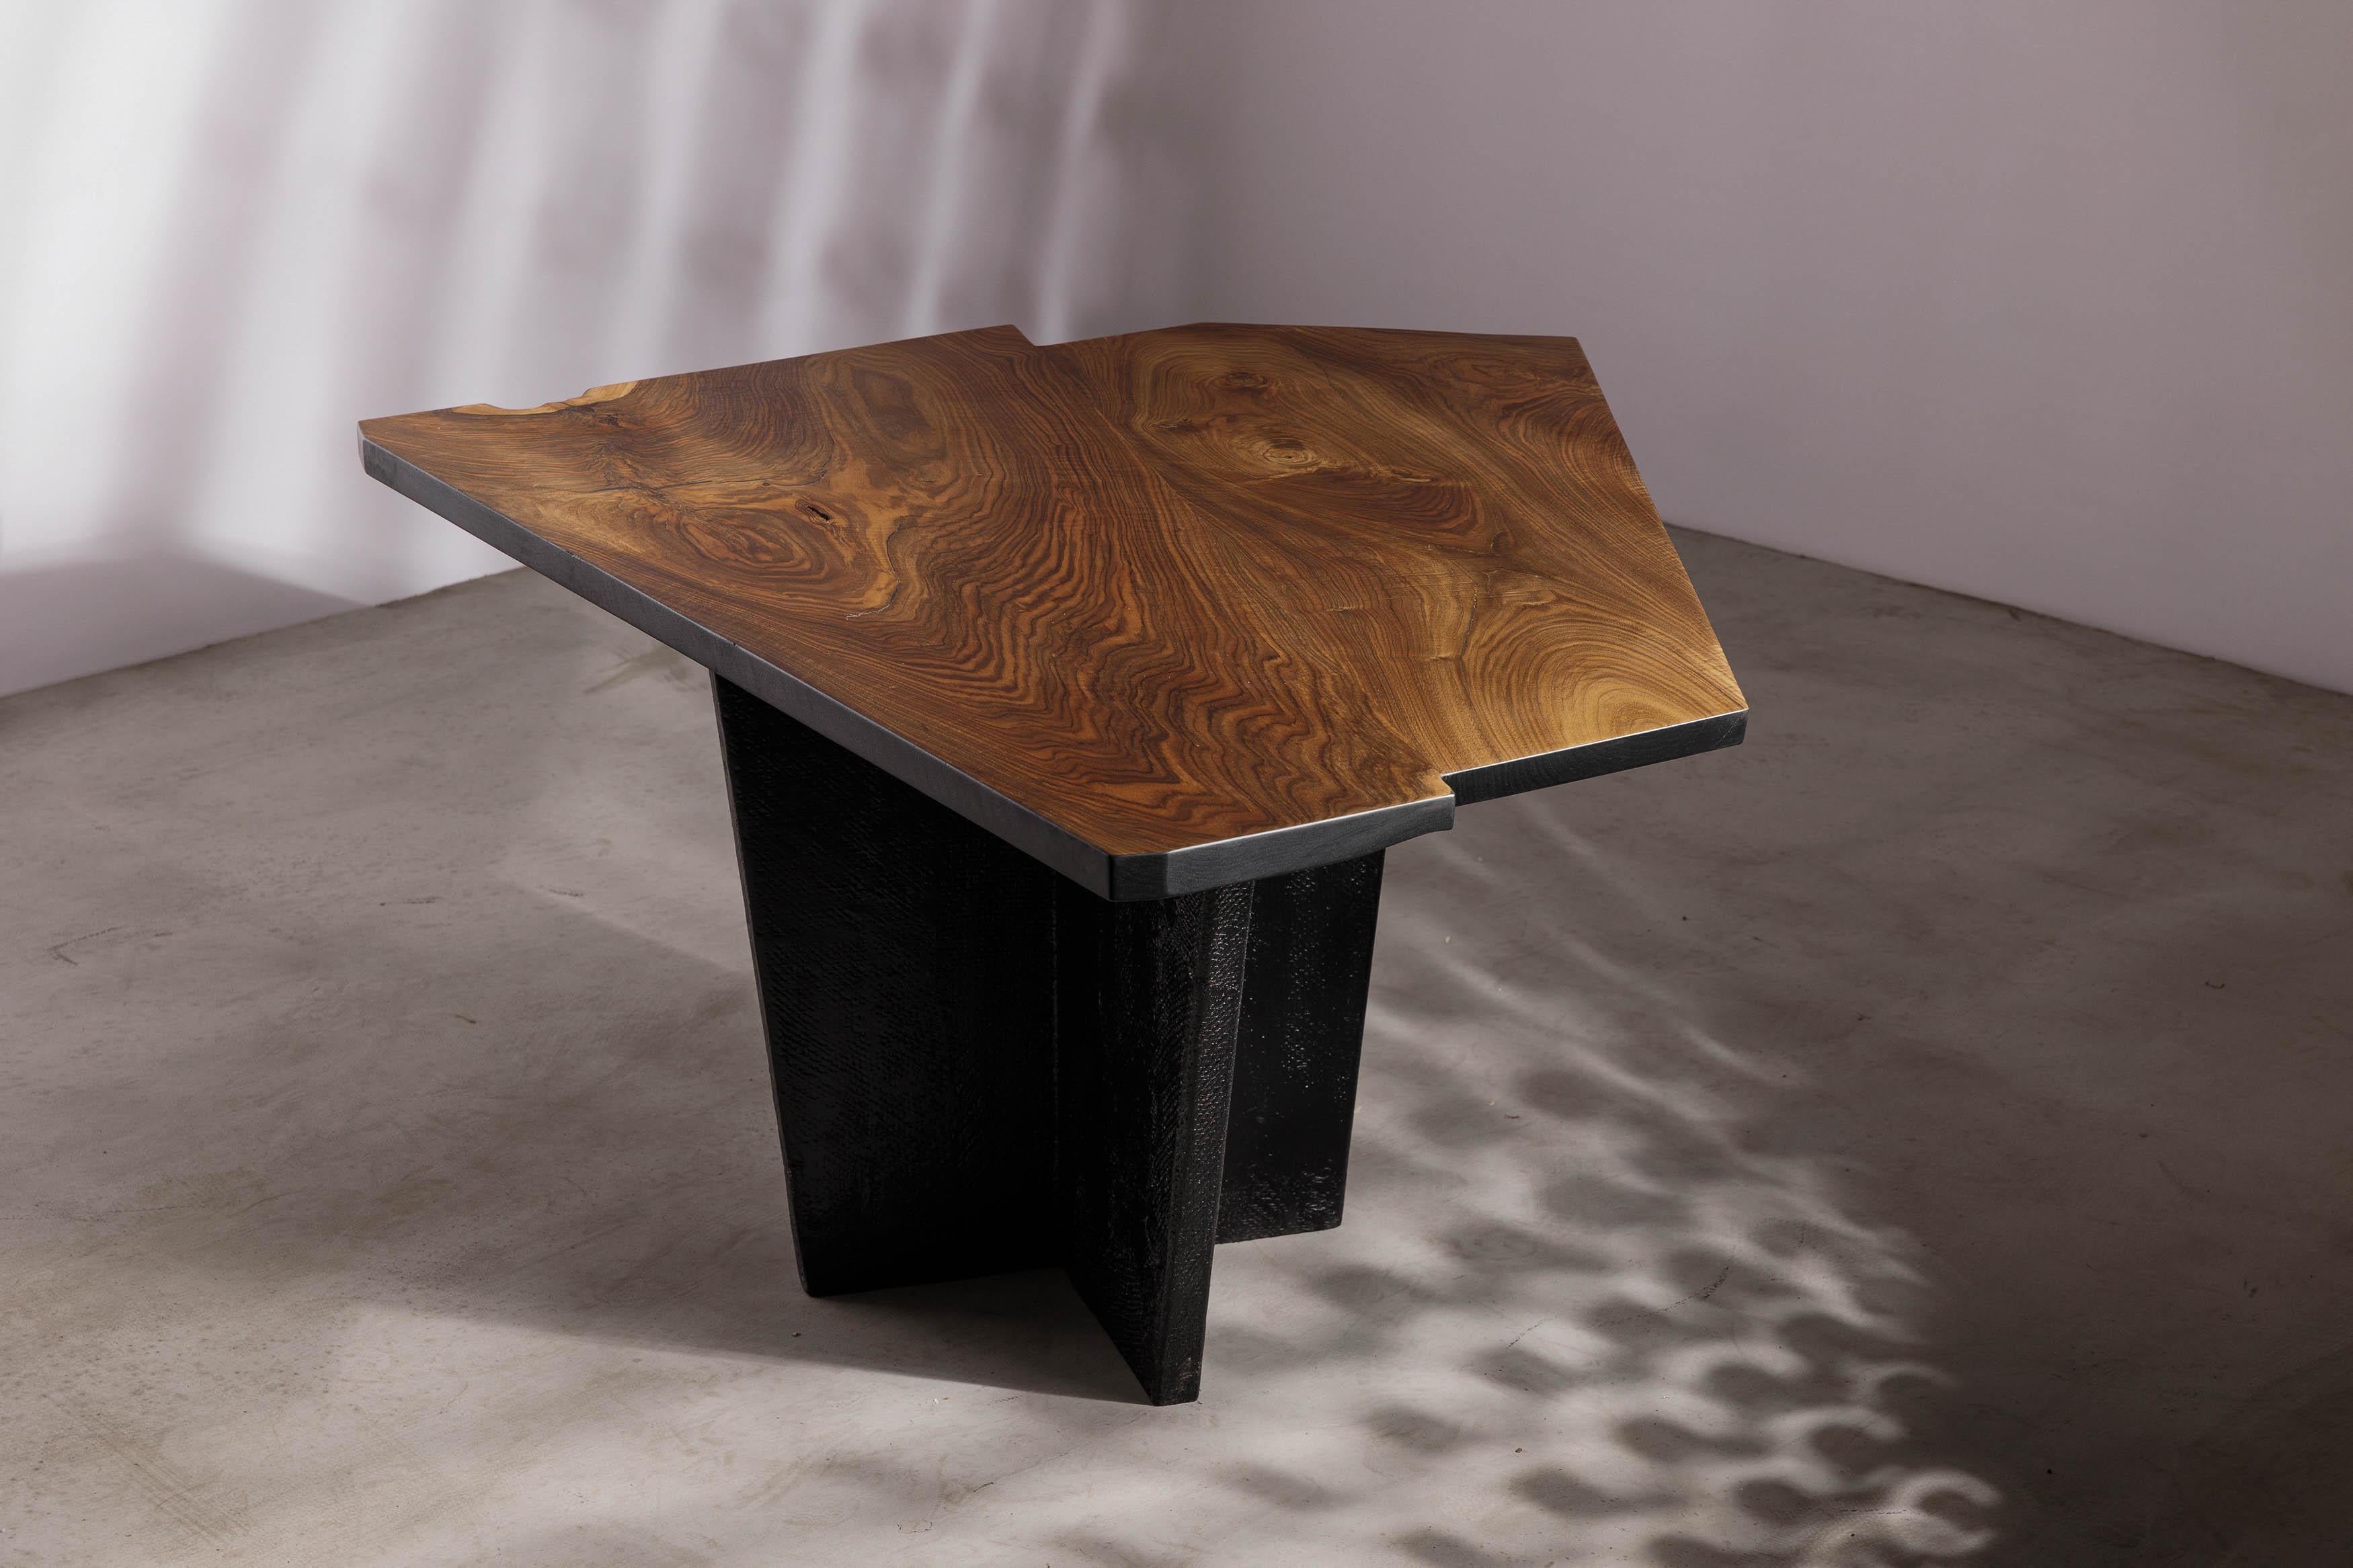 EM205 dining table by Eero Moss
One of a kind
Dimensions; W 140 x D 120 x H 77 cm
Materials: Walnut, ash, fiberglass, acrylic resin, India ink.
Finish: Natural oils.

18 Brut Collection

The latest collection by the artist is a tribute to